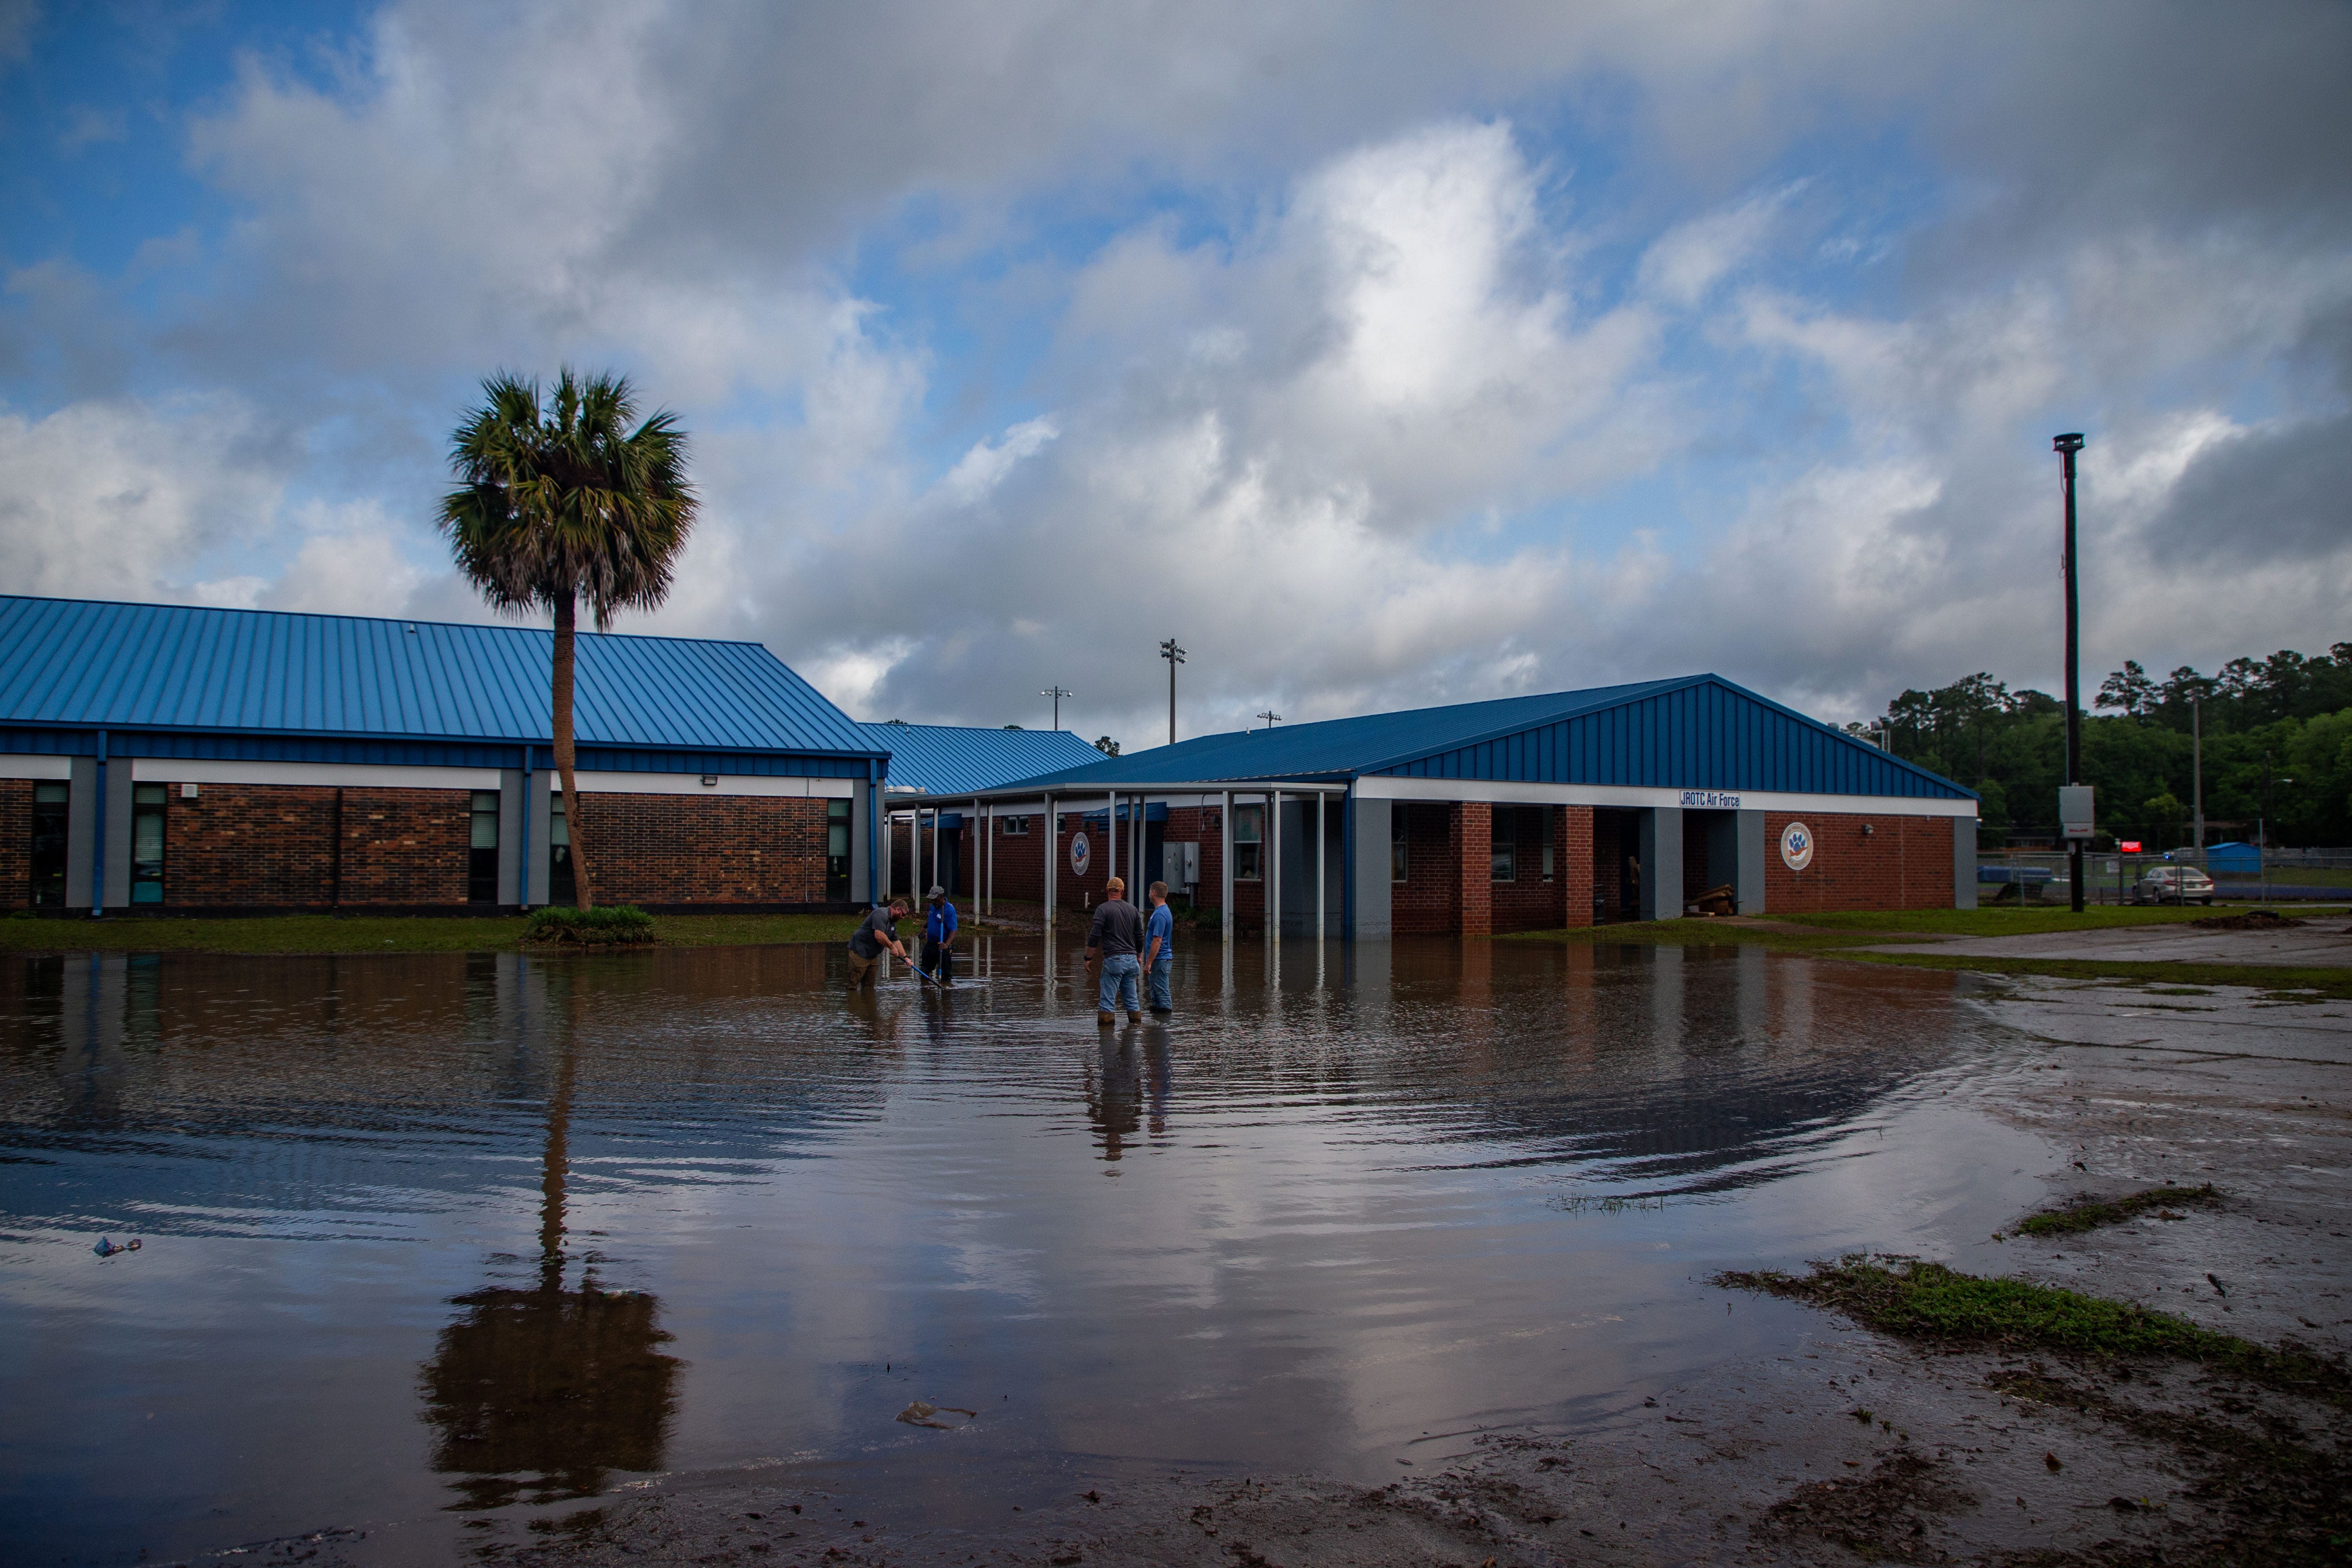 Godby High: Damage from flooding 'mere bump in the road,' principal says; repairs to come